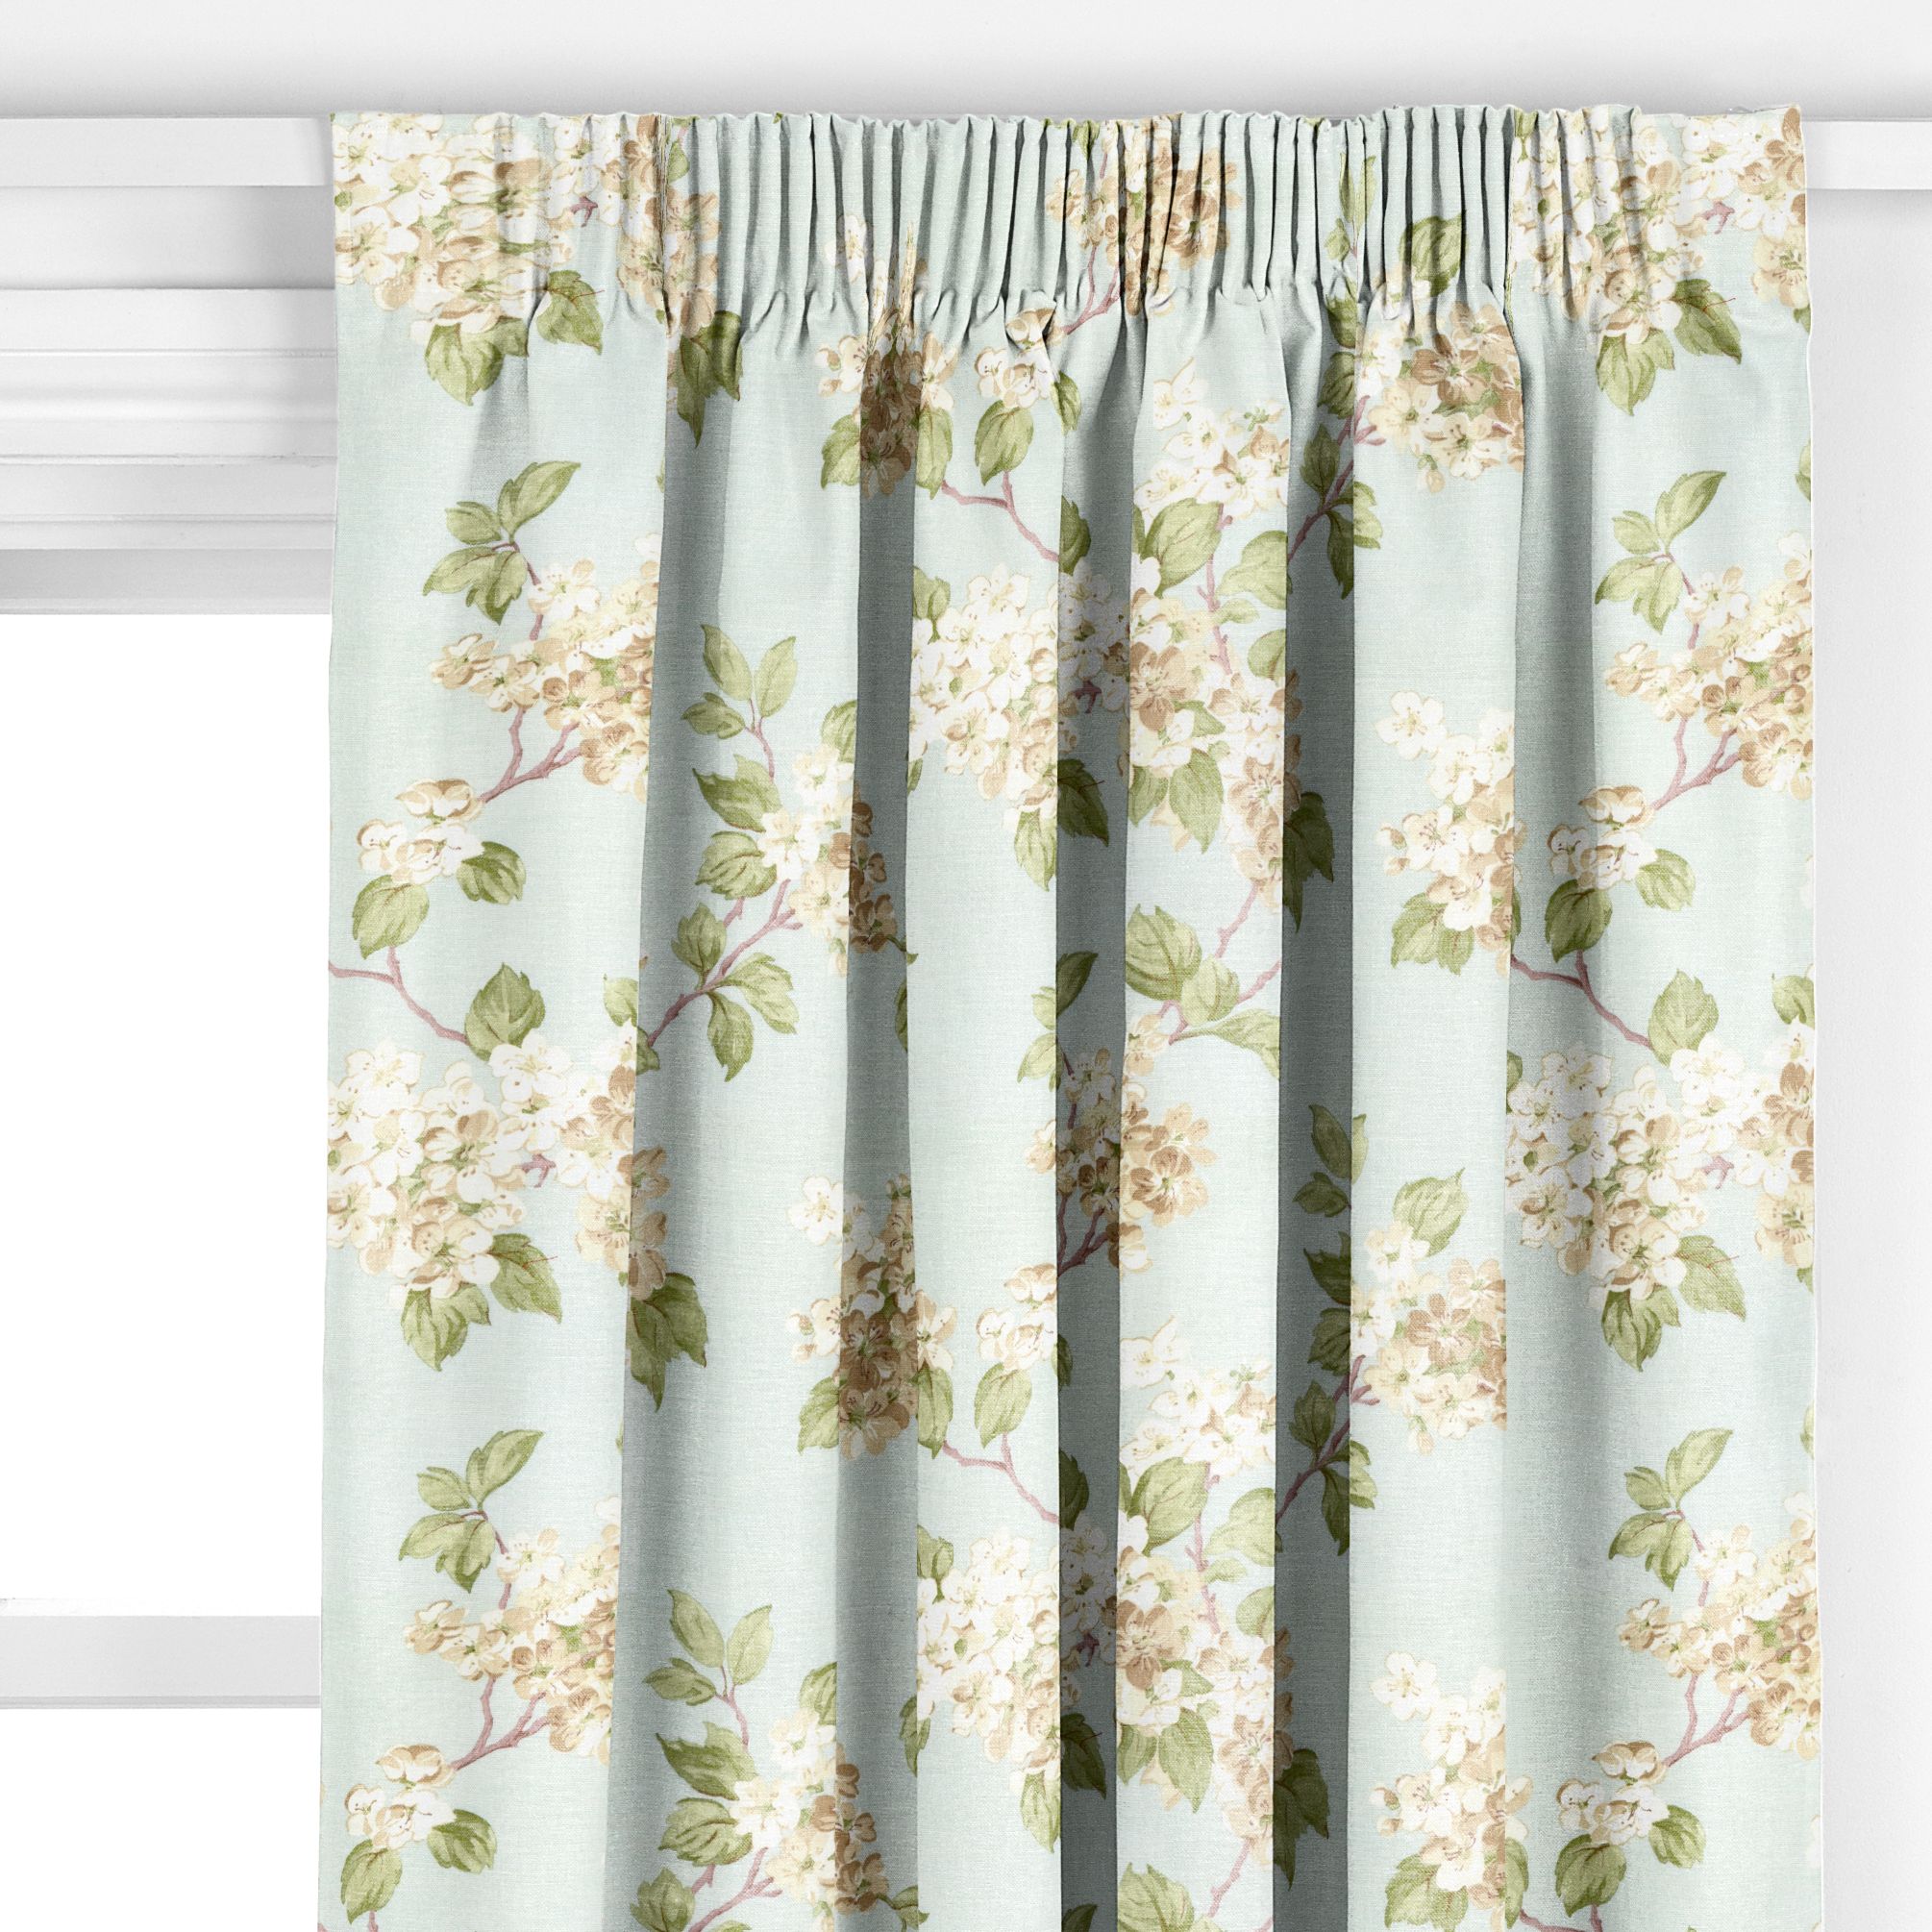 Blossom Pencil Pleat Curtains, Duck